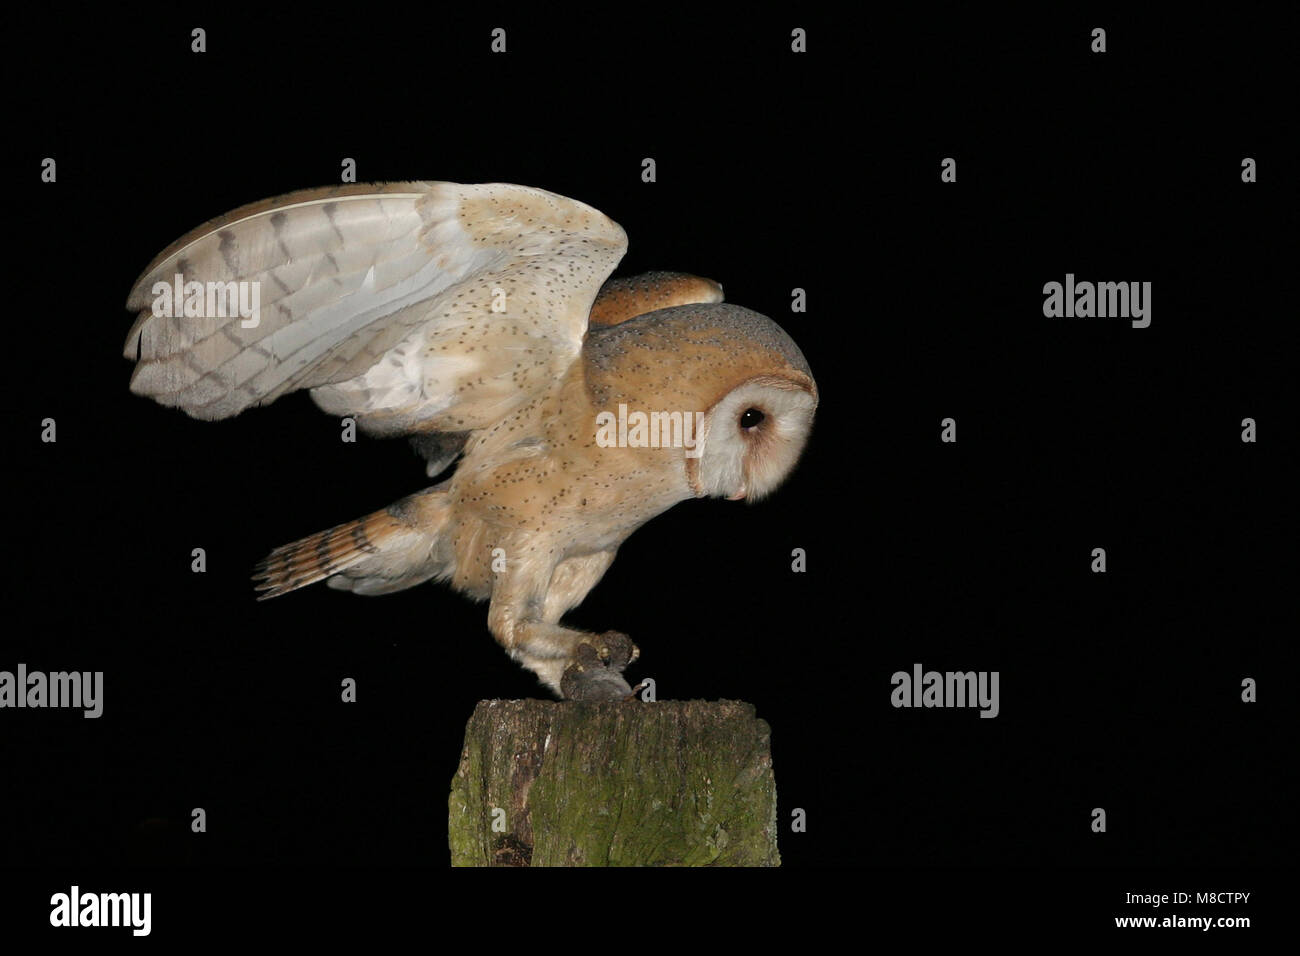 Barn Owl adult perched on a pole with prey; Kerkuil volwassen zittend op een paal met prooi Stock Photo